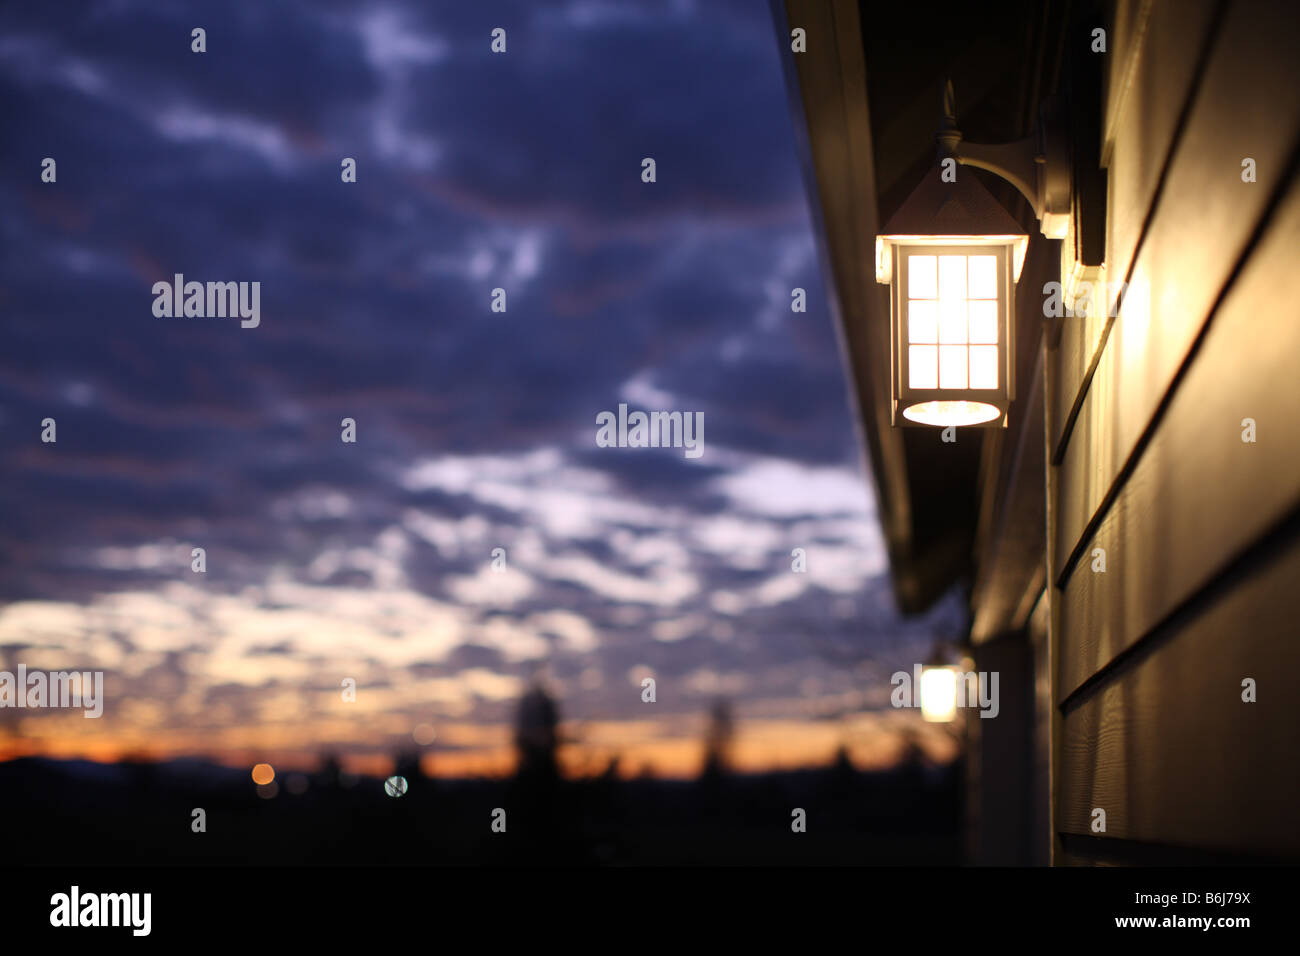 Light on home at night with cloudy dusk sky Stock Photo